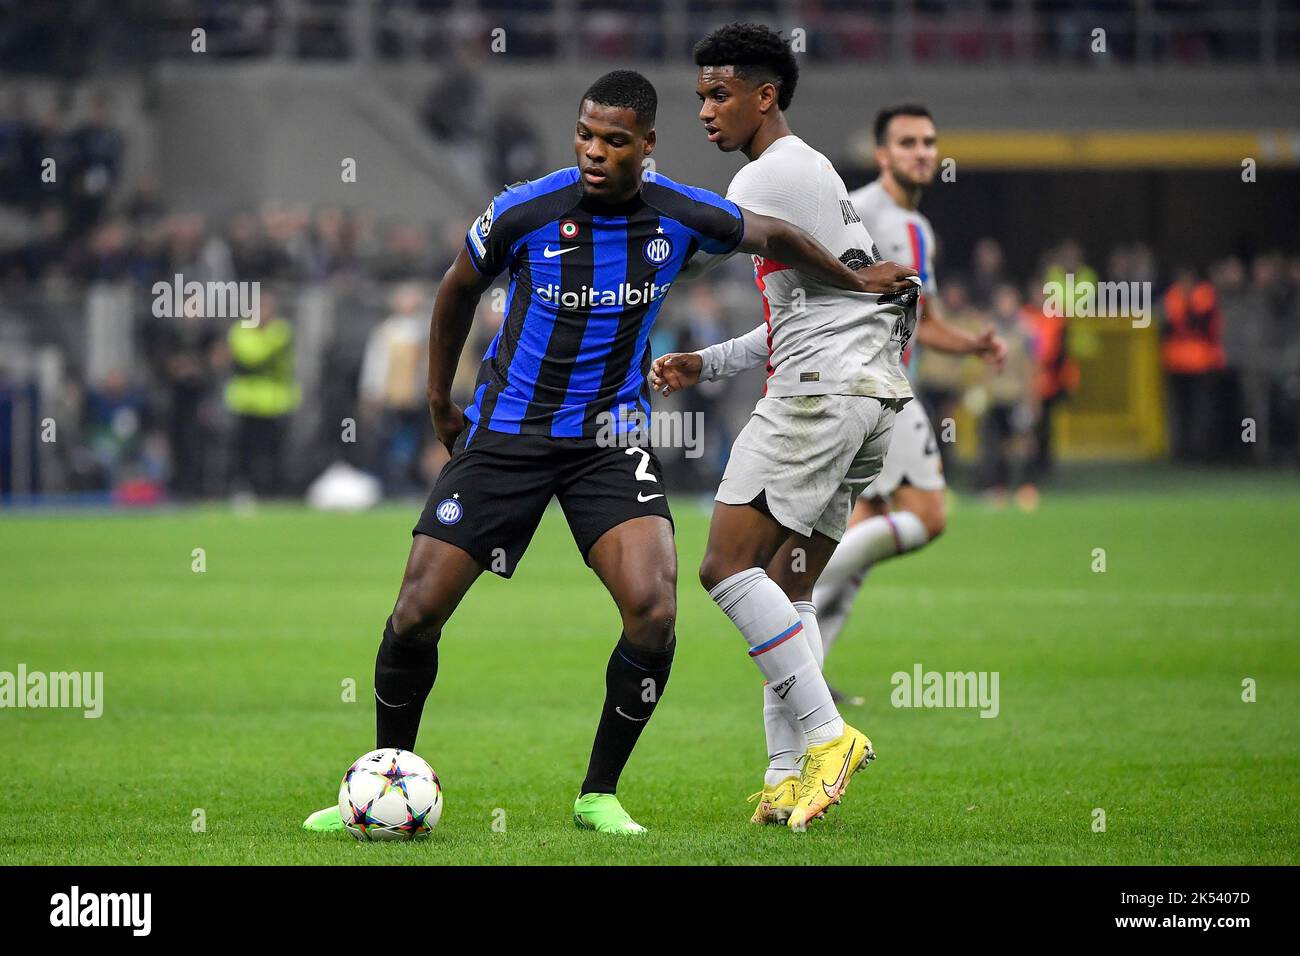 Denzel Dumfries of Fc Internazionale and Alejandro Balde of Barcelona compete for the ball during the Champions League Group C football match between Stock Photo